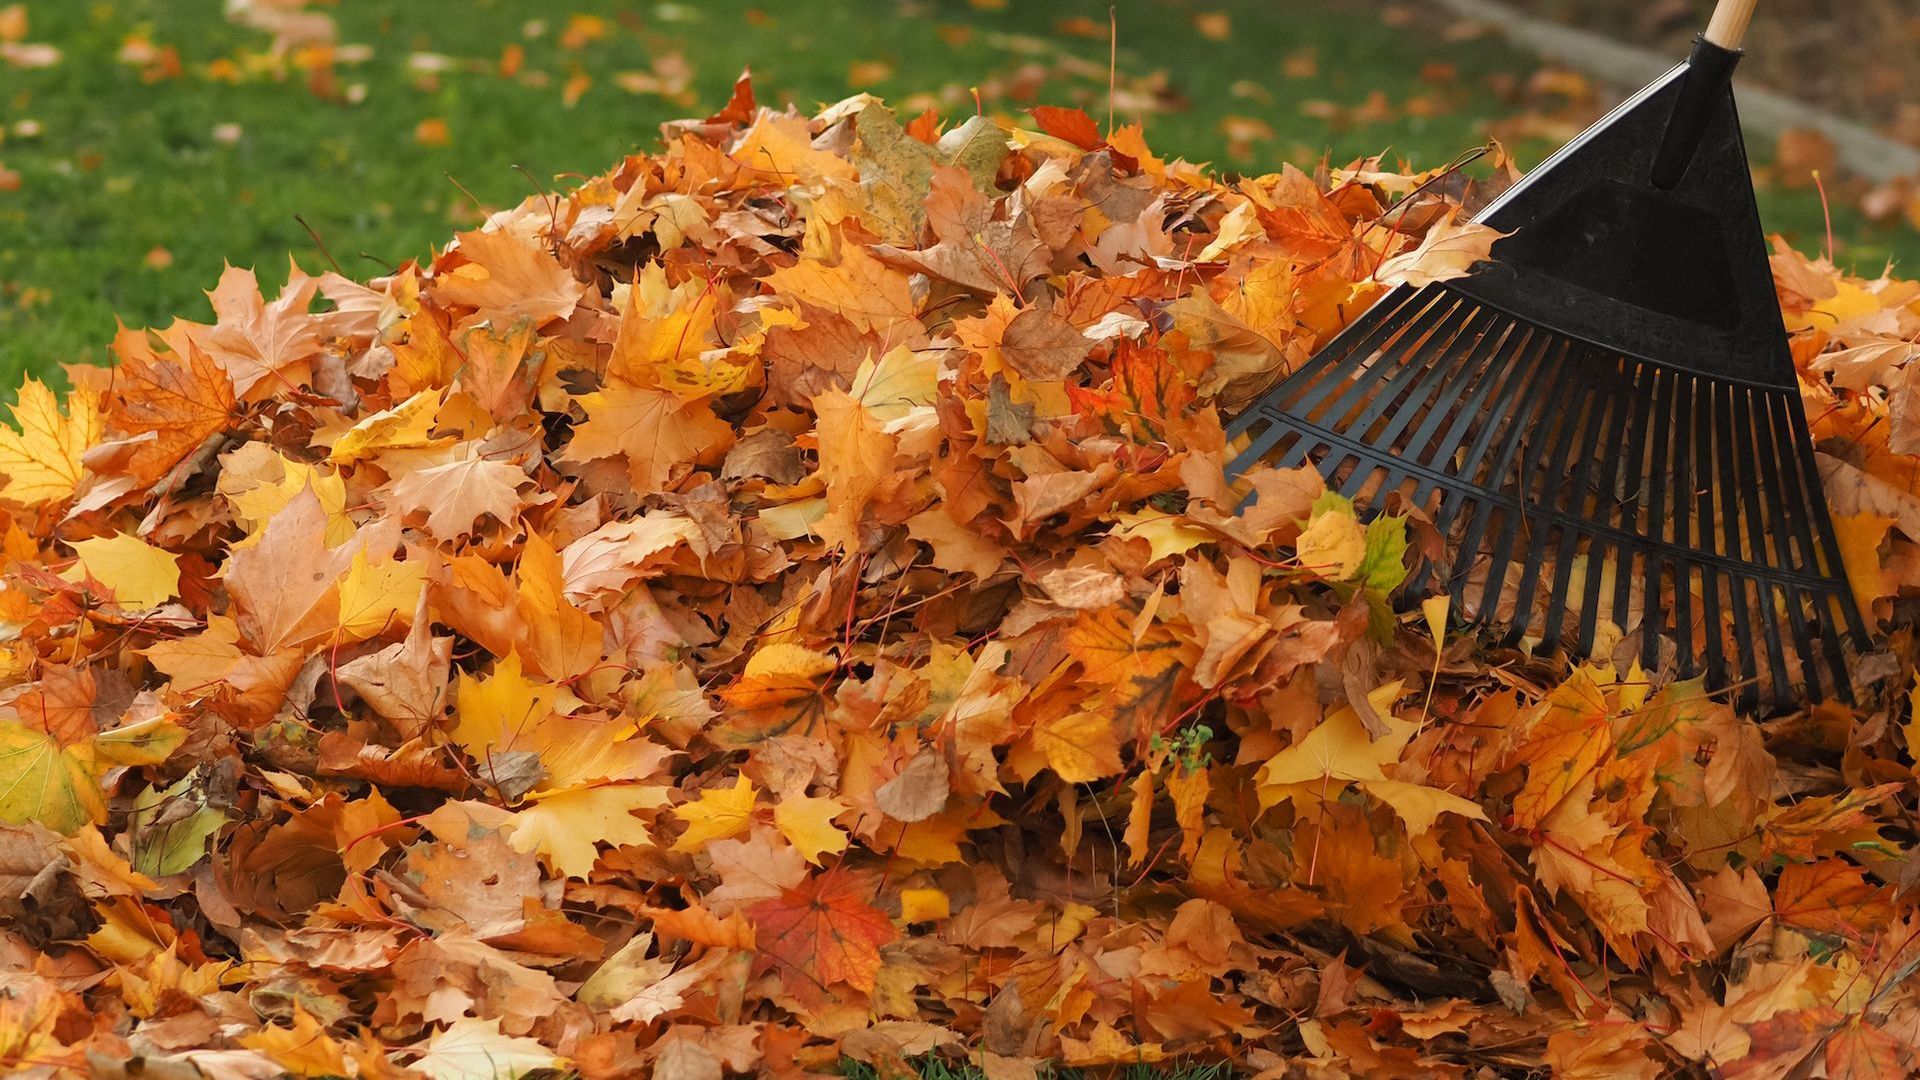 a rake is sitting on top of a pile of leaves .